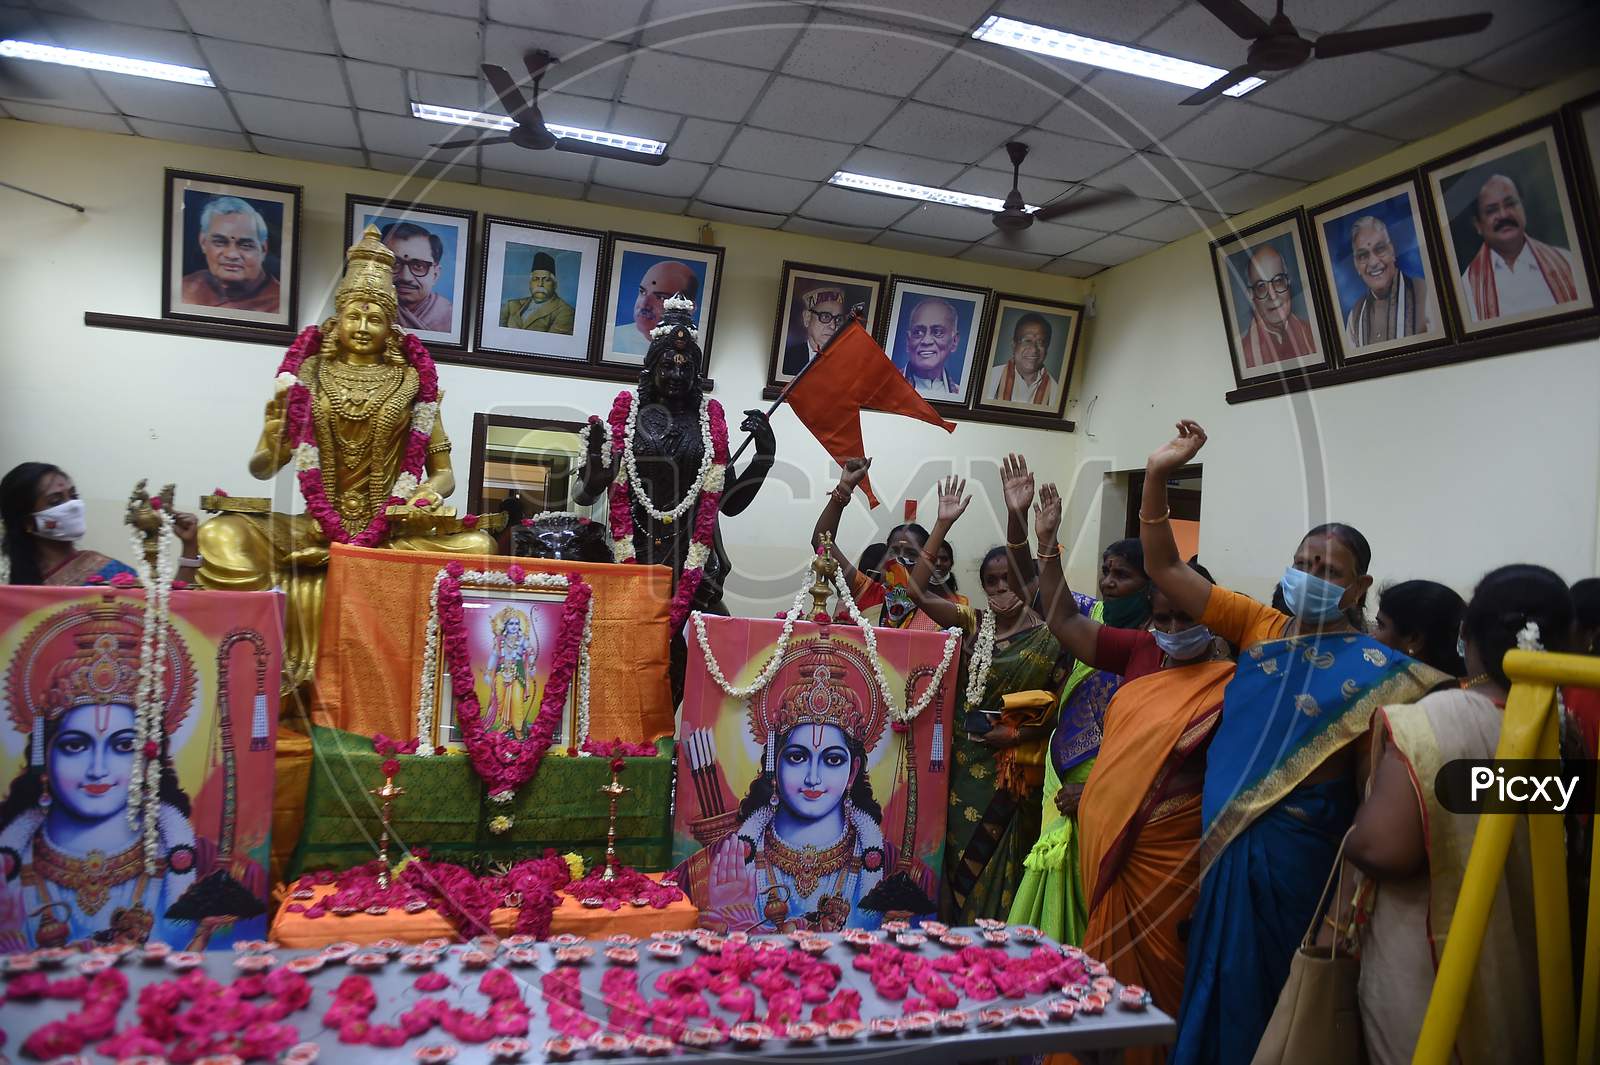 BJP Workers Celebrate The Ground Breaking Ceremony For Proposed Ram Temple In Ayodhya, At a Party Office In Chennai, Wednesday, Aug 5, 2020.